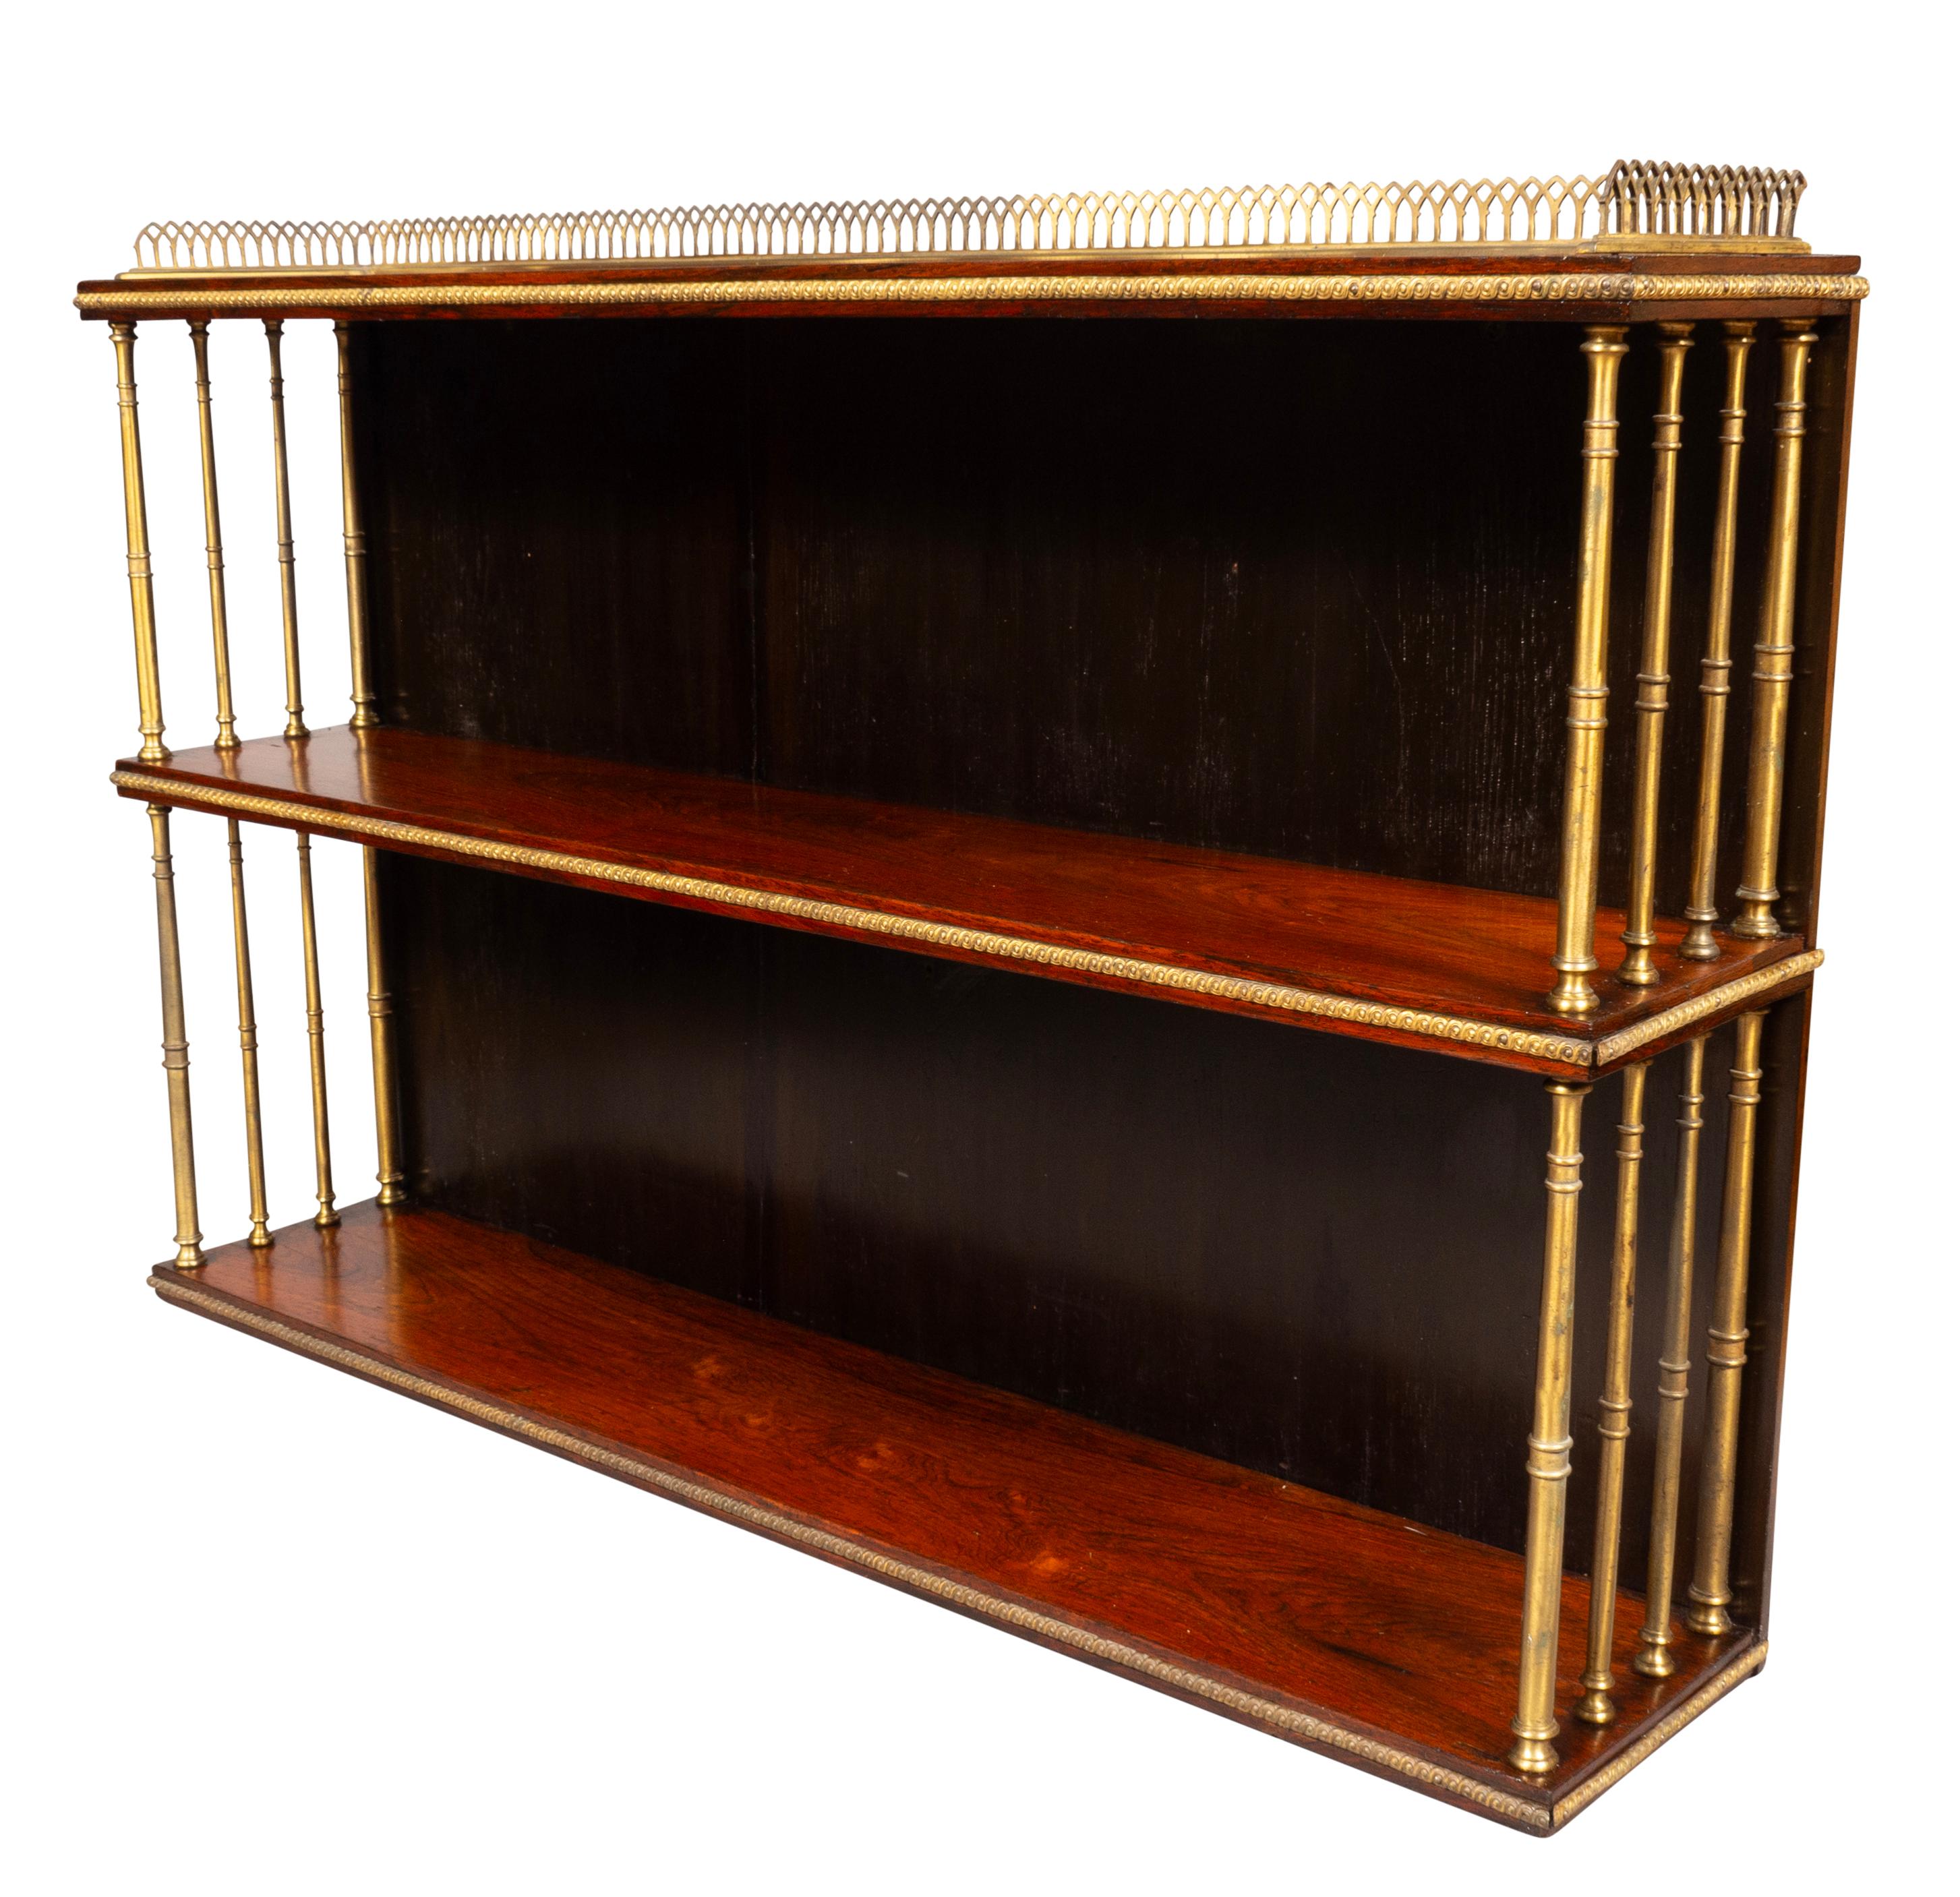 Early 19th Century Regency Rosewood And Brass Hanging Shelf